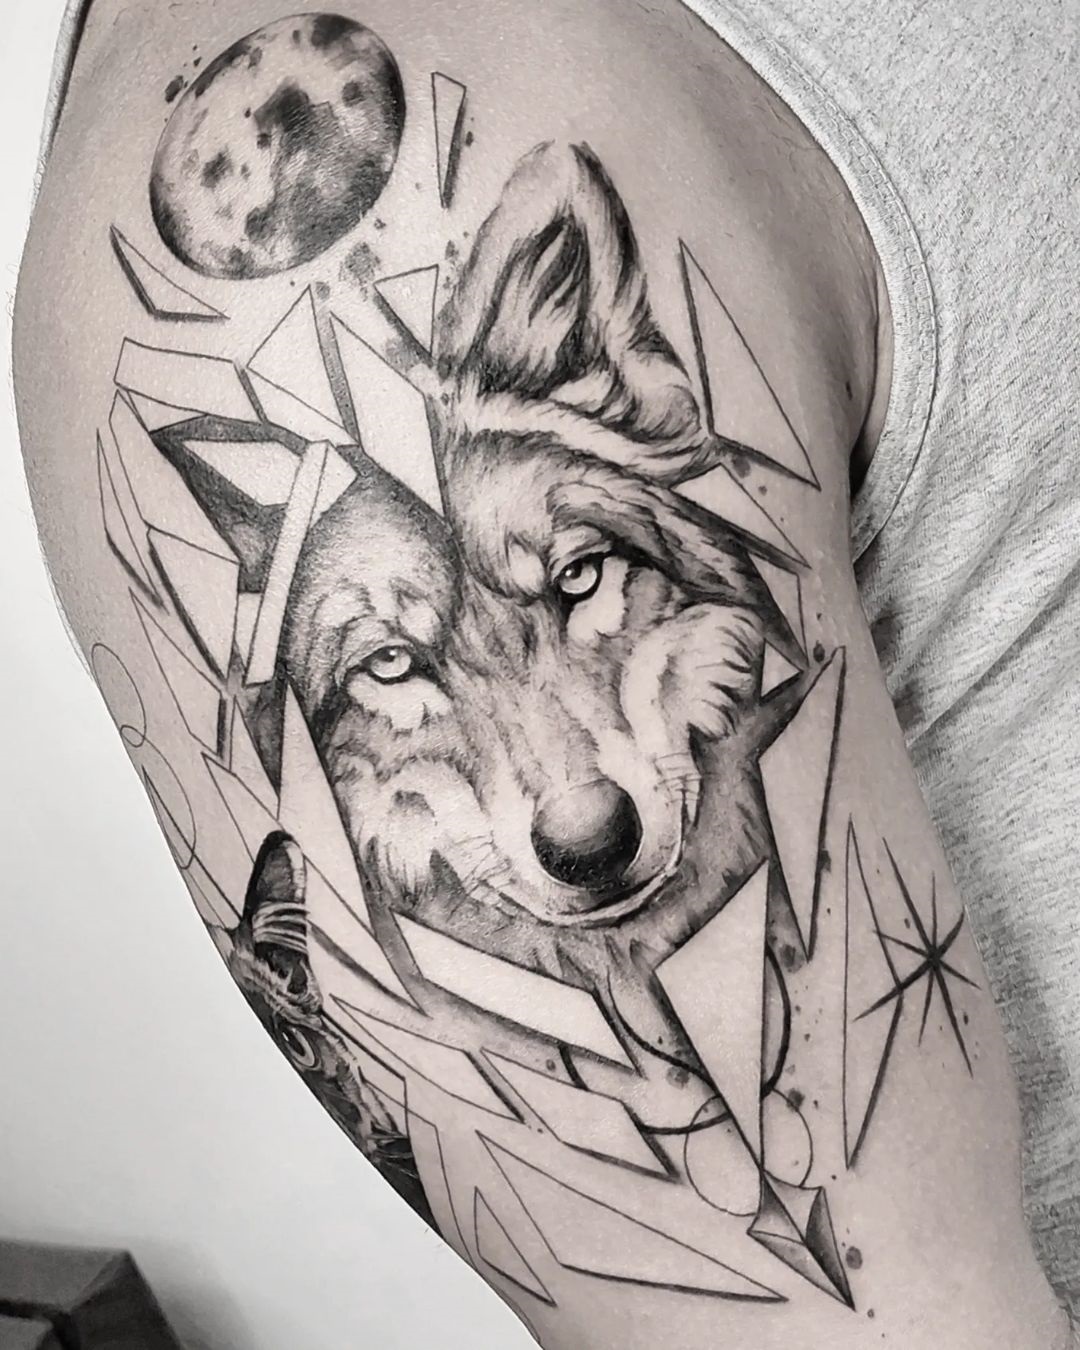 40 Of The Best Geometric Tattoos For Men in 2024 | FashionBeans